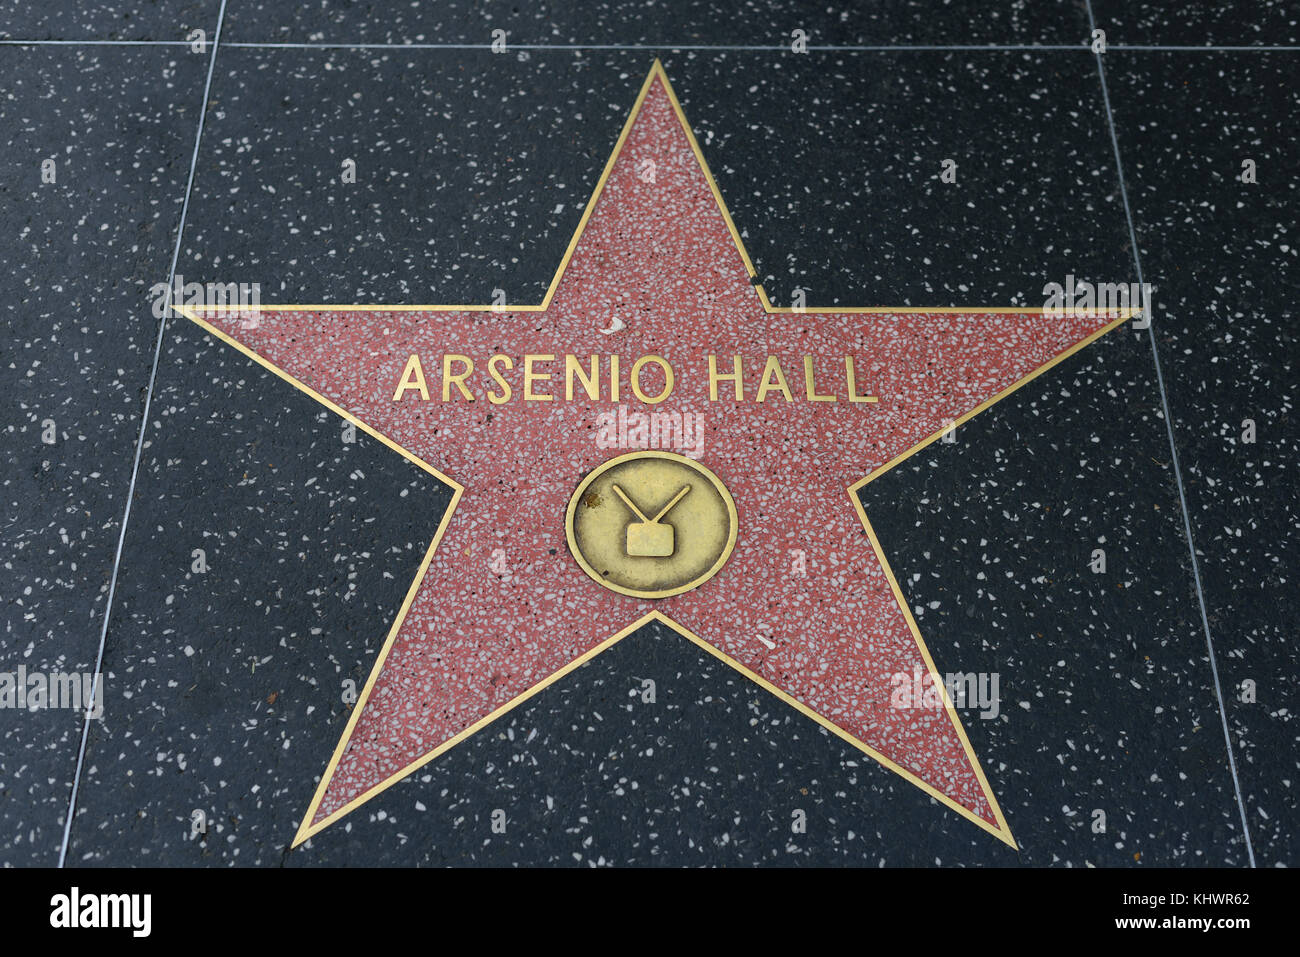 HOLLYWOOD, CA - DECEMBER 06: Arsenio Hall star on the Hollywood Walk of Fame in Hollywood, California on Dec. 6, 2016. Stock Photo